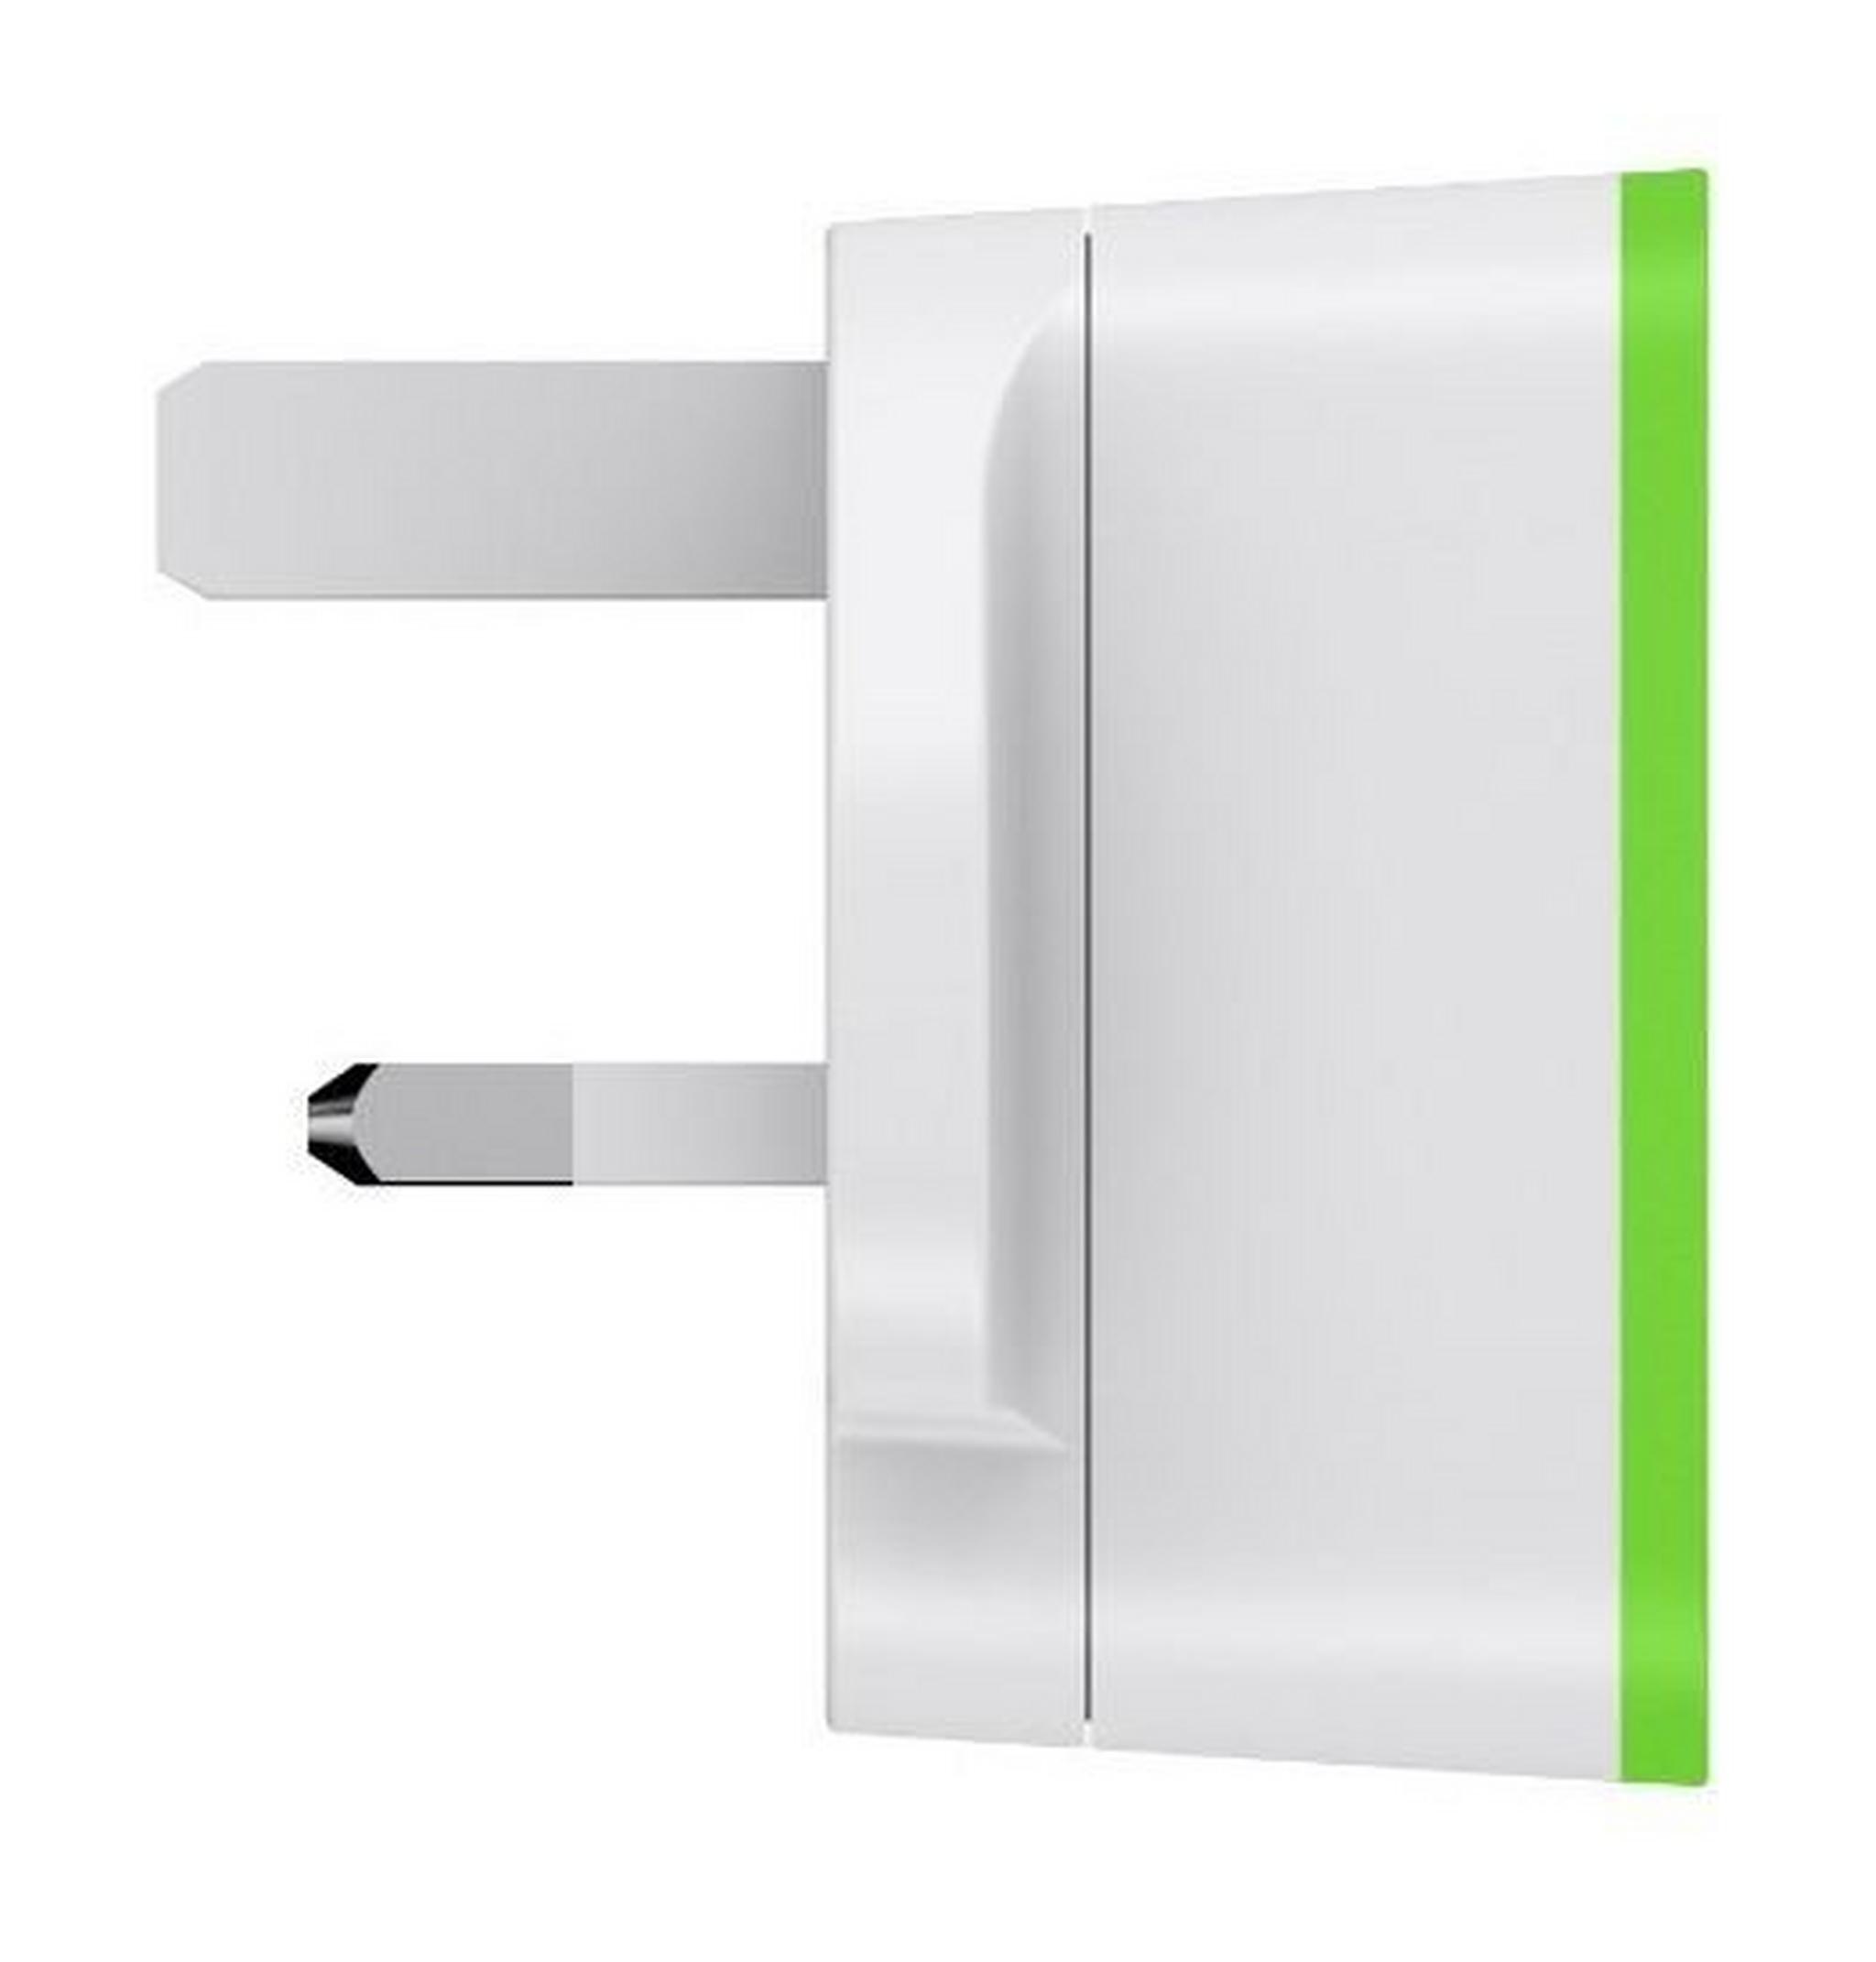 Belkin Home Charger USB Adapter 12W - (F8J040uk) - White